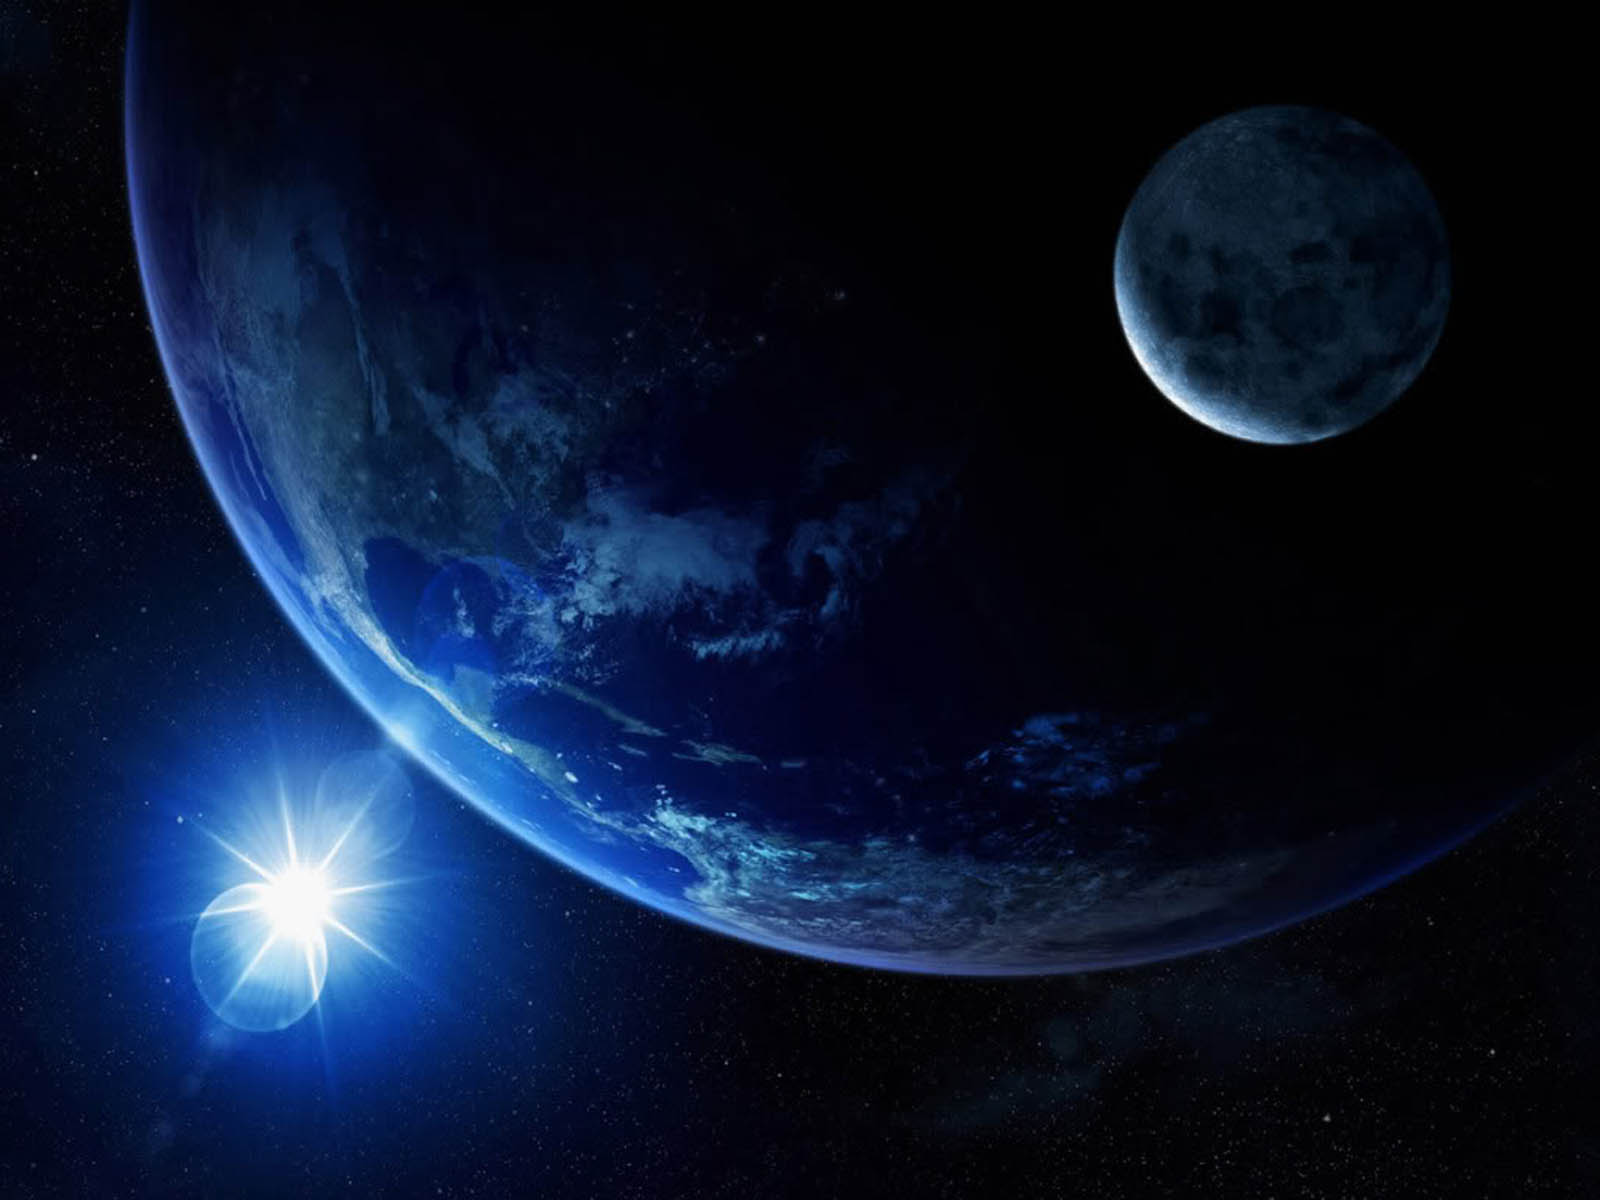 Tag Earth And Moon Wallpapers BackgroundsPhotos Images and